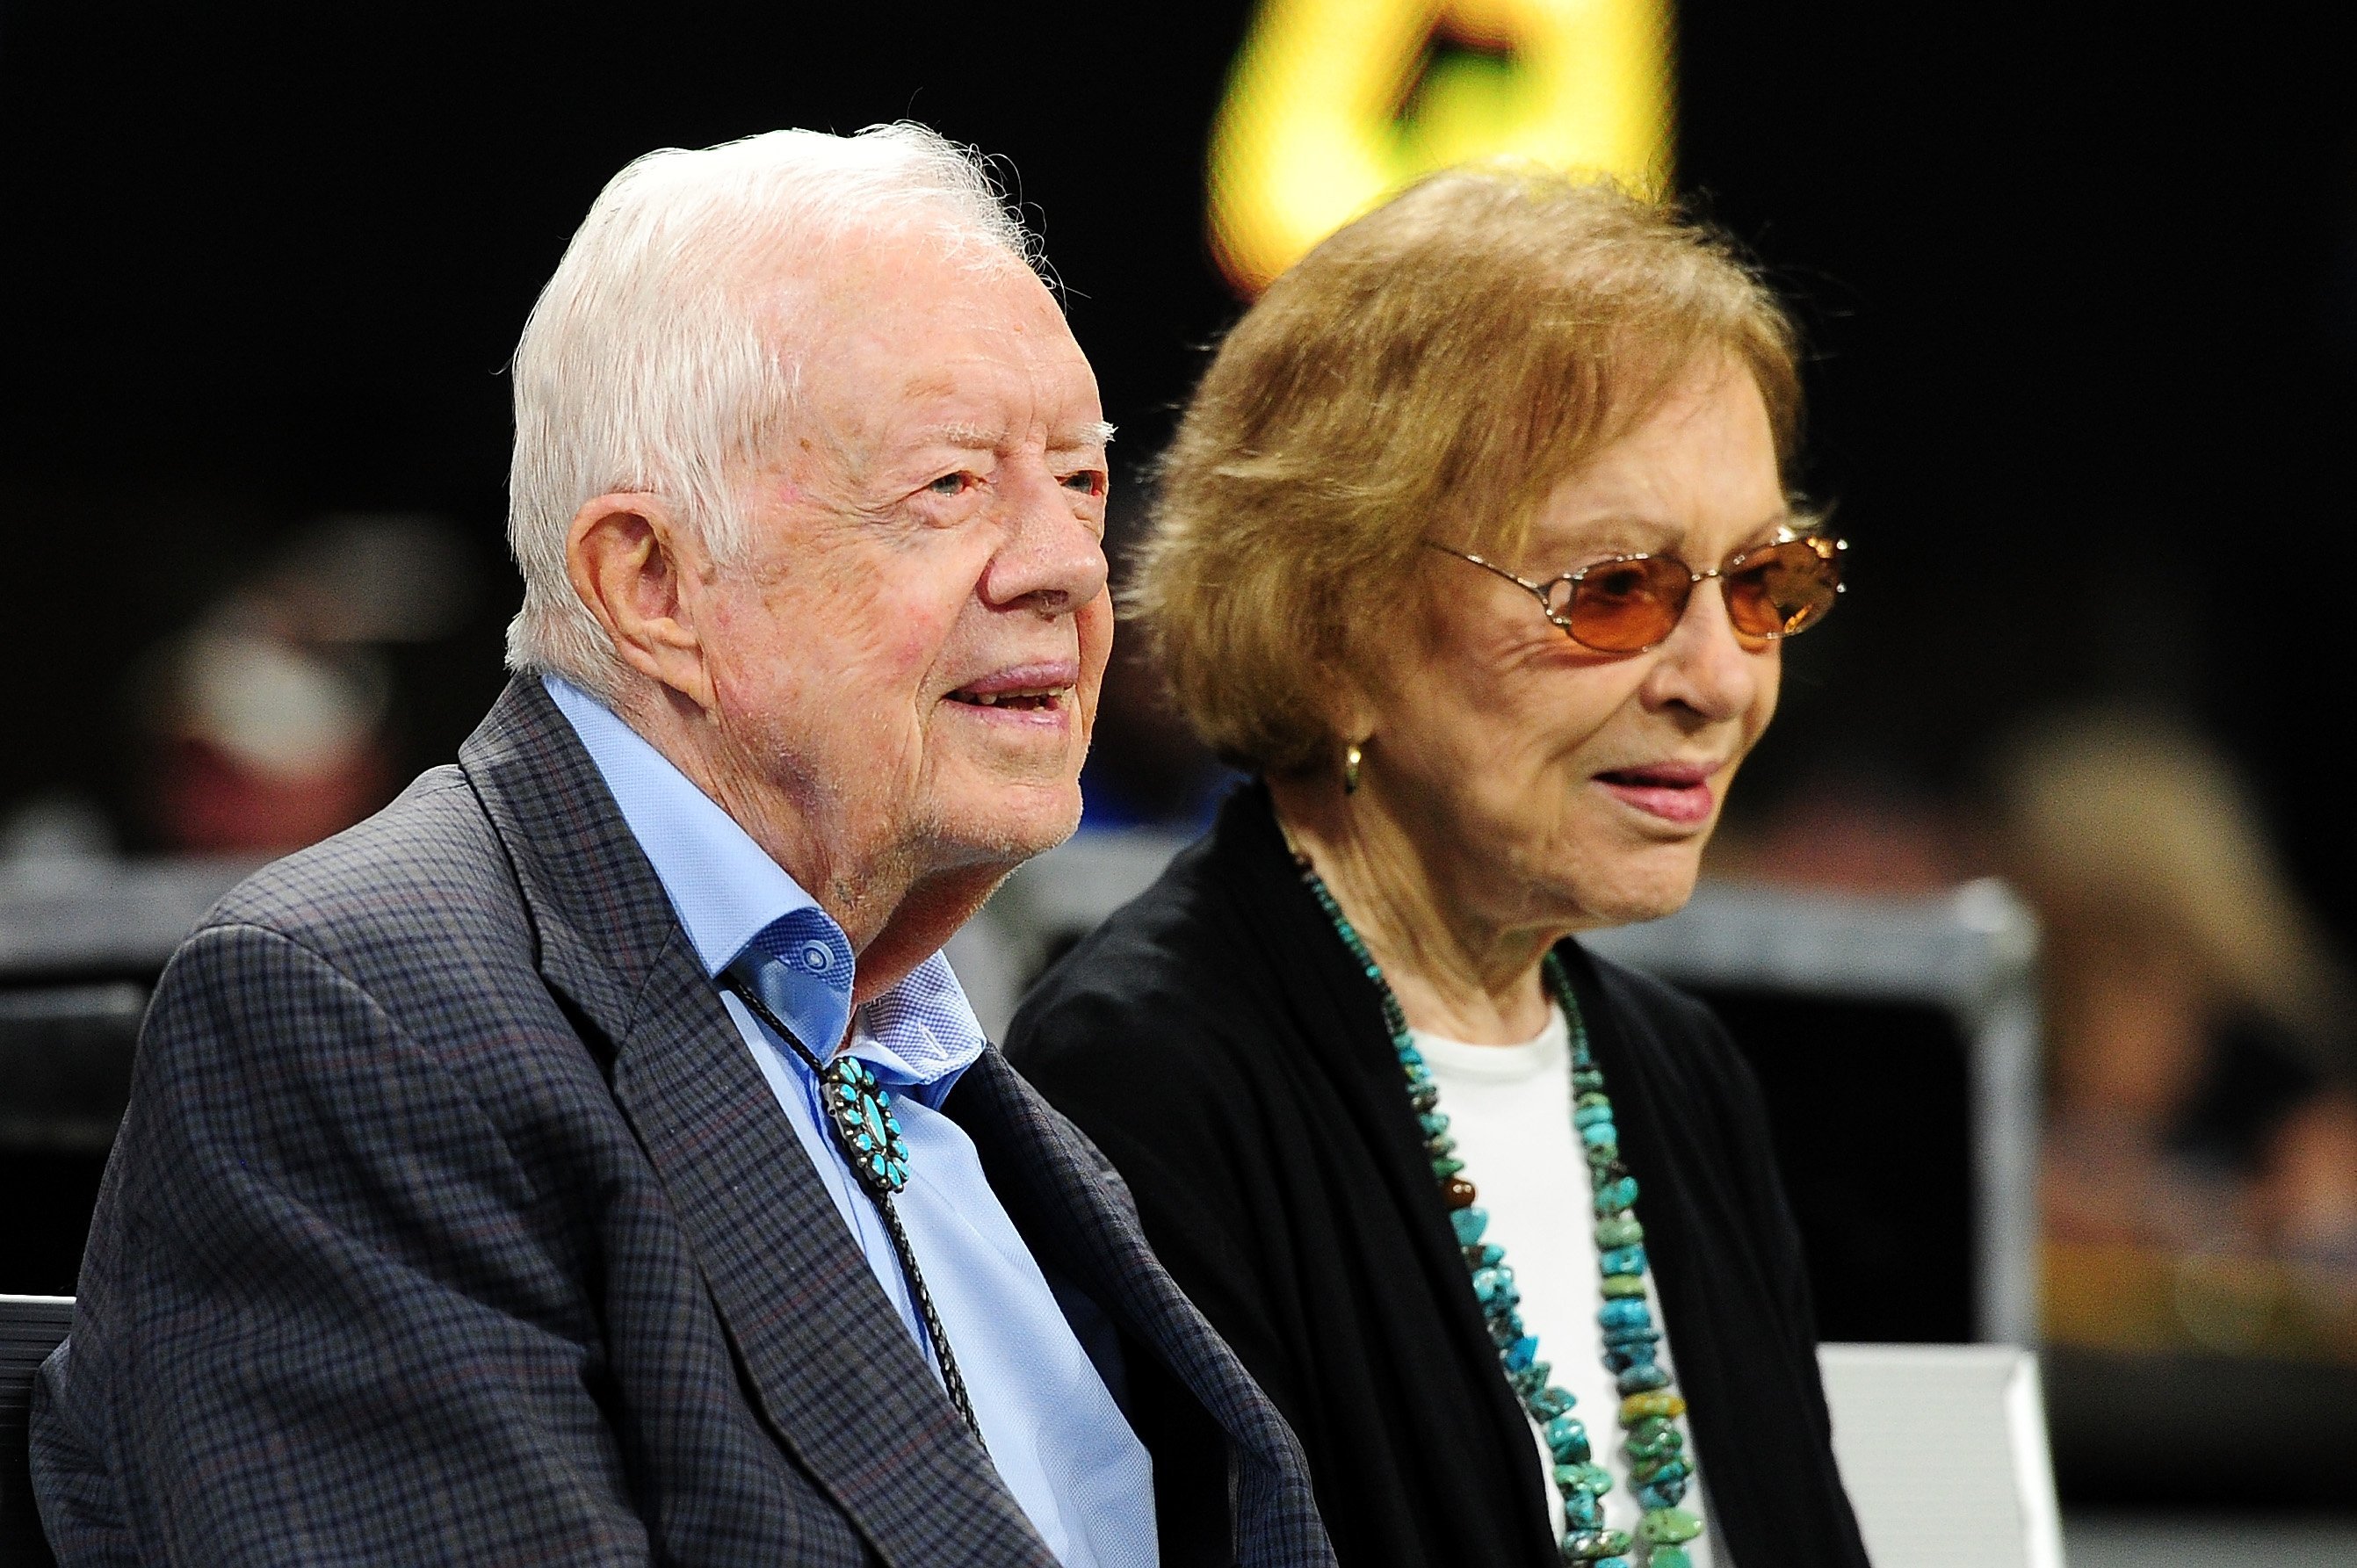 Former president Jimmy Carter and his wife Rosalynn prior to the game between the Atlanta Falcons and the Cincinnati Bengals at Mercedes-Benz Stadium on September 30, 2018, in Atlanta, Georgia. | Source: Getty Images.